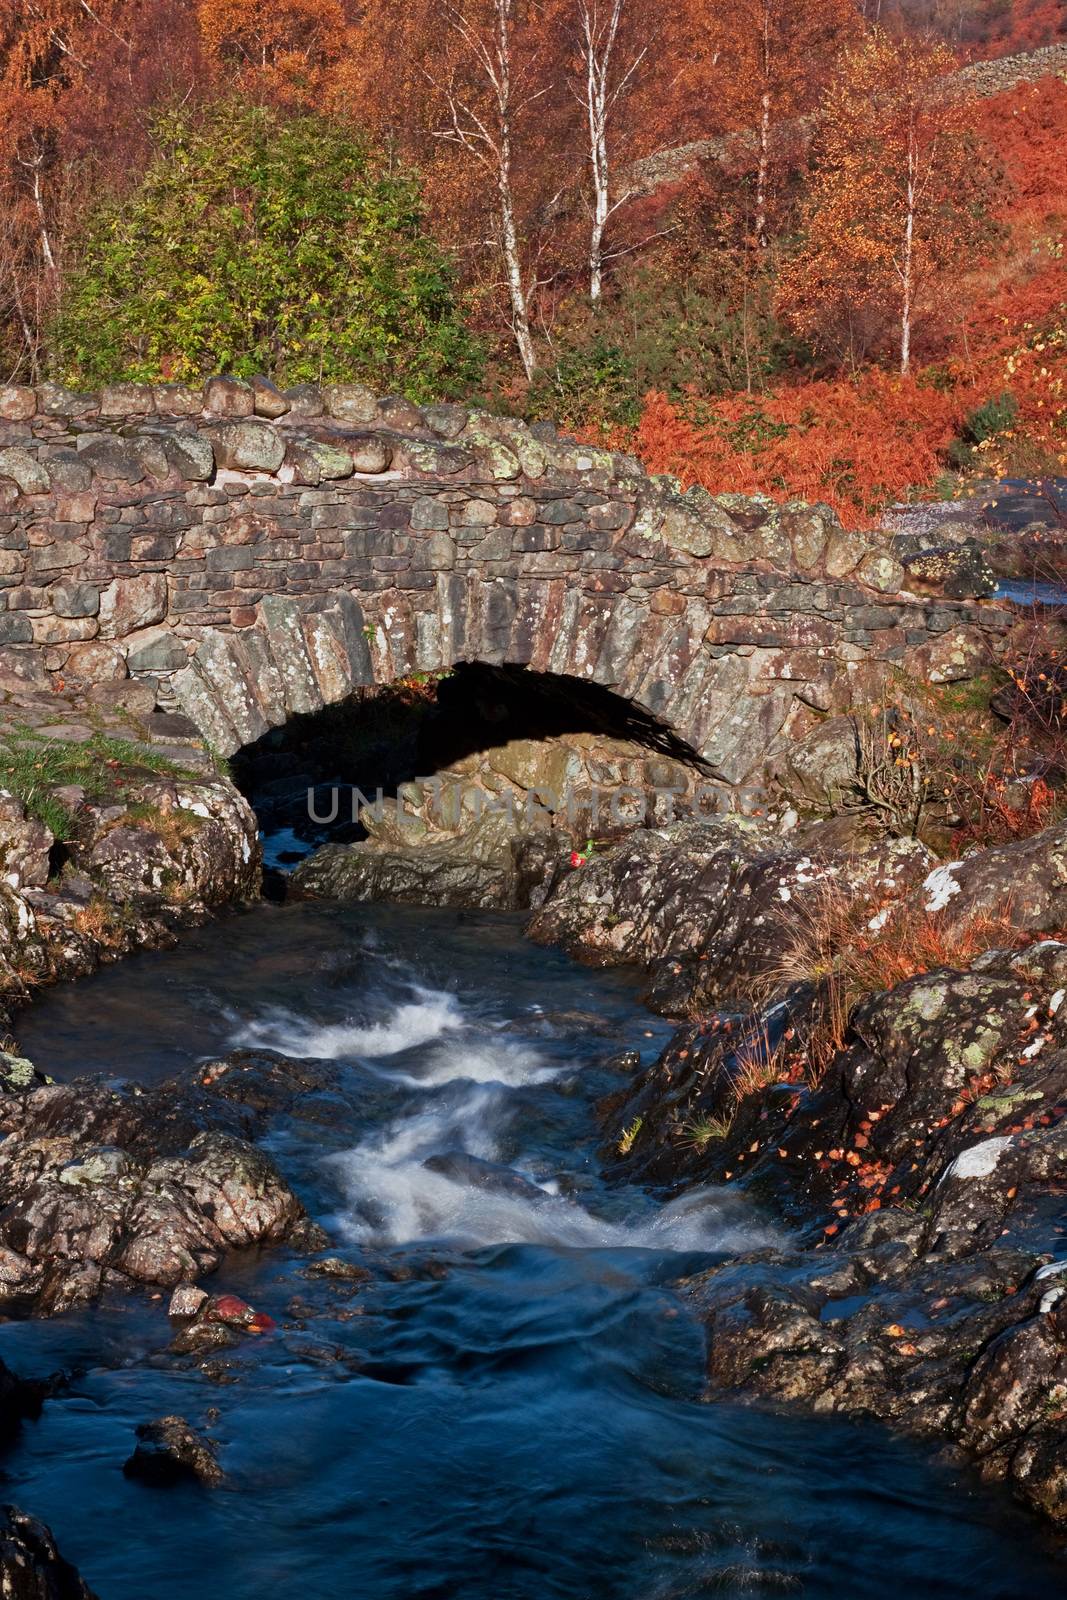 Ashness Bridge is a picturesque humped back bridge crosses Barrow Beck and is a landmark close to Derwentwater in the English Lake District national park.